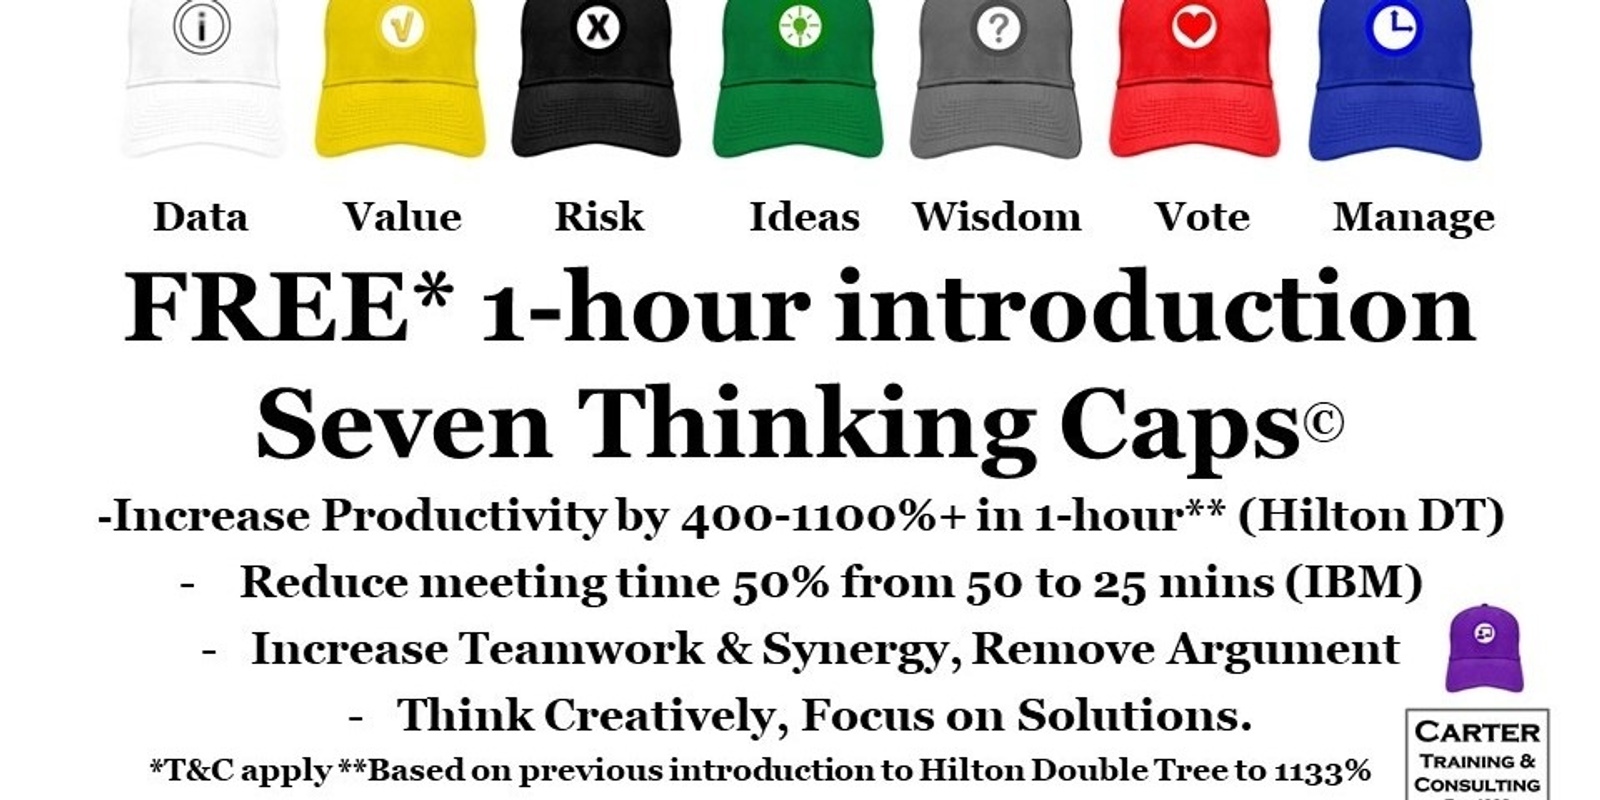 Banner image for 1 HOUR FREE INTRODUCTION to Seven Thinking Caps training